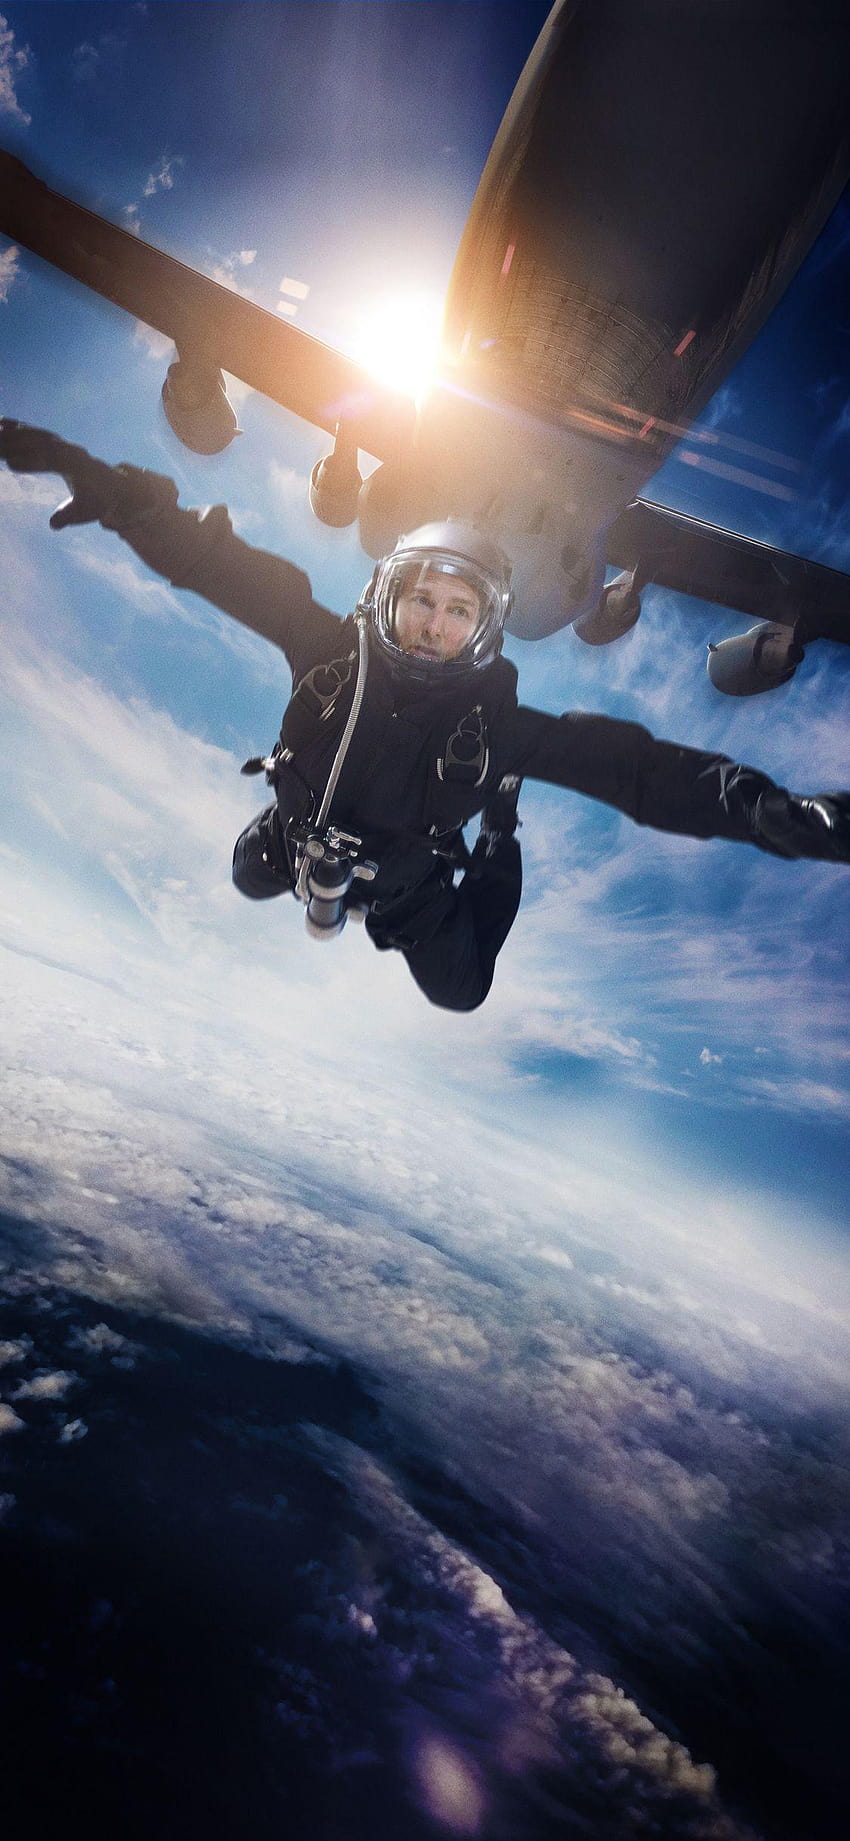 1125x2436 Mission Impossible Fallout Jumping Out Of Plane 포스터, 미션 임파서블 아이폰 HD 전화 배경 화면